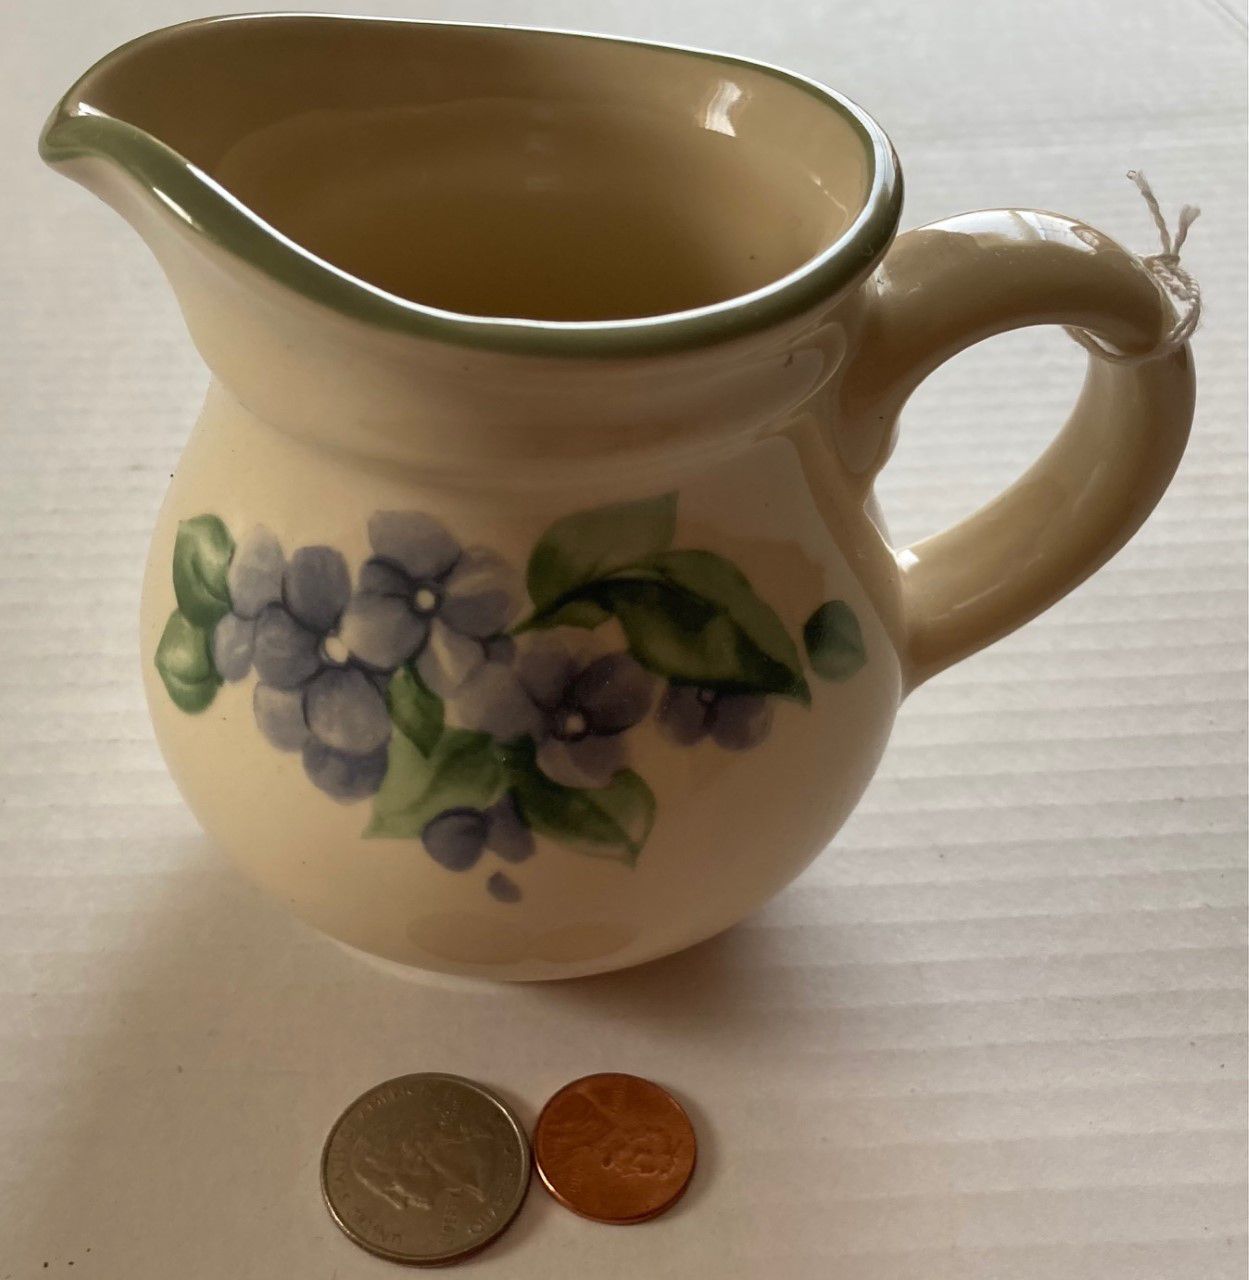 Vintage Pfaltzgraff Pitcher, Made in USA, Comes With a Box, Kitchen Decor, Shelf Display, Quality Pitcher